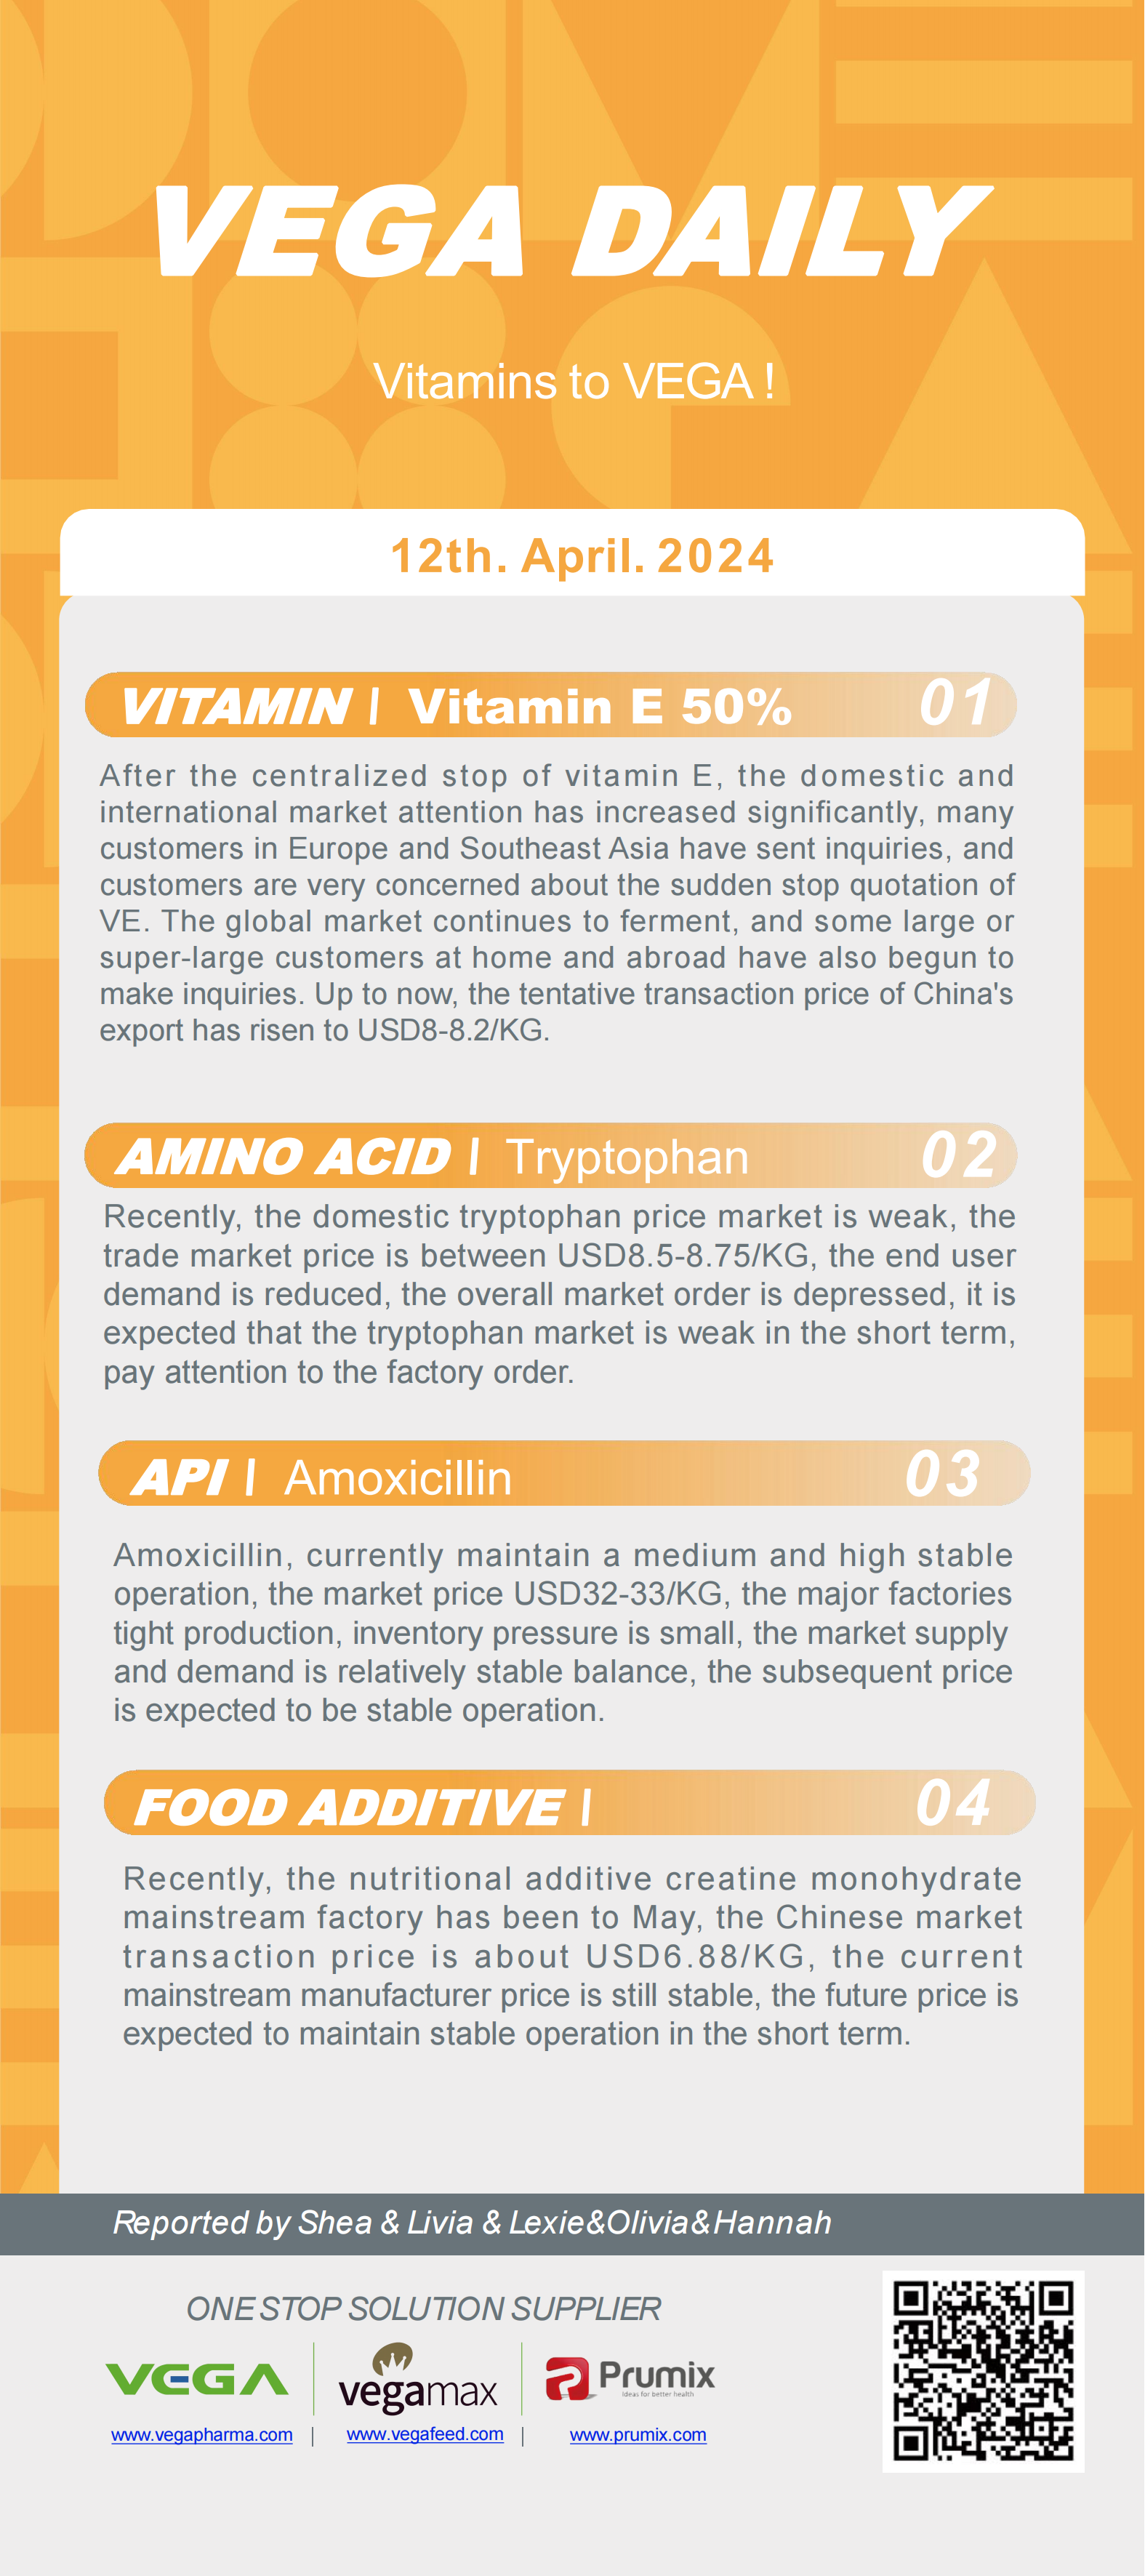 Vega Daily Dated on Apr 12th 2024 Vitamin Amino Acid APl Food Additives.png